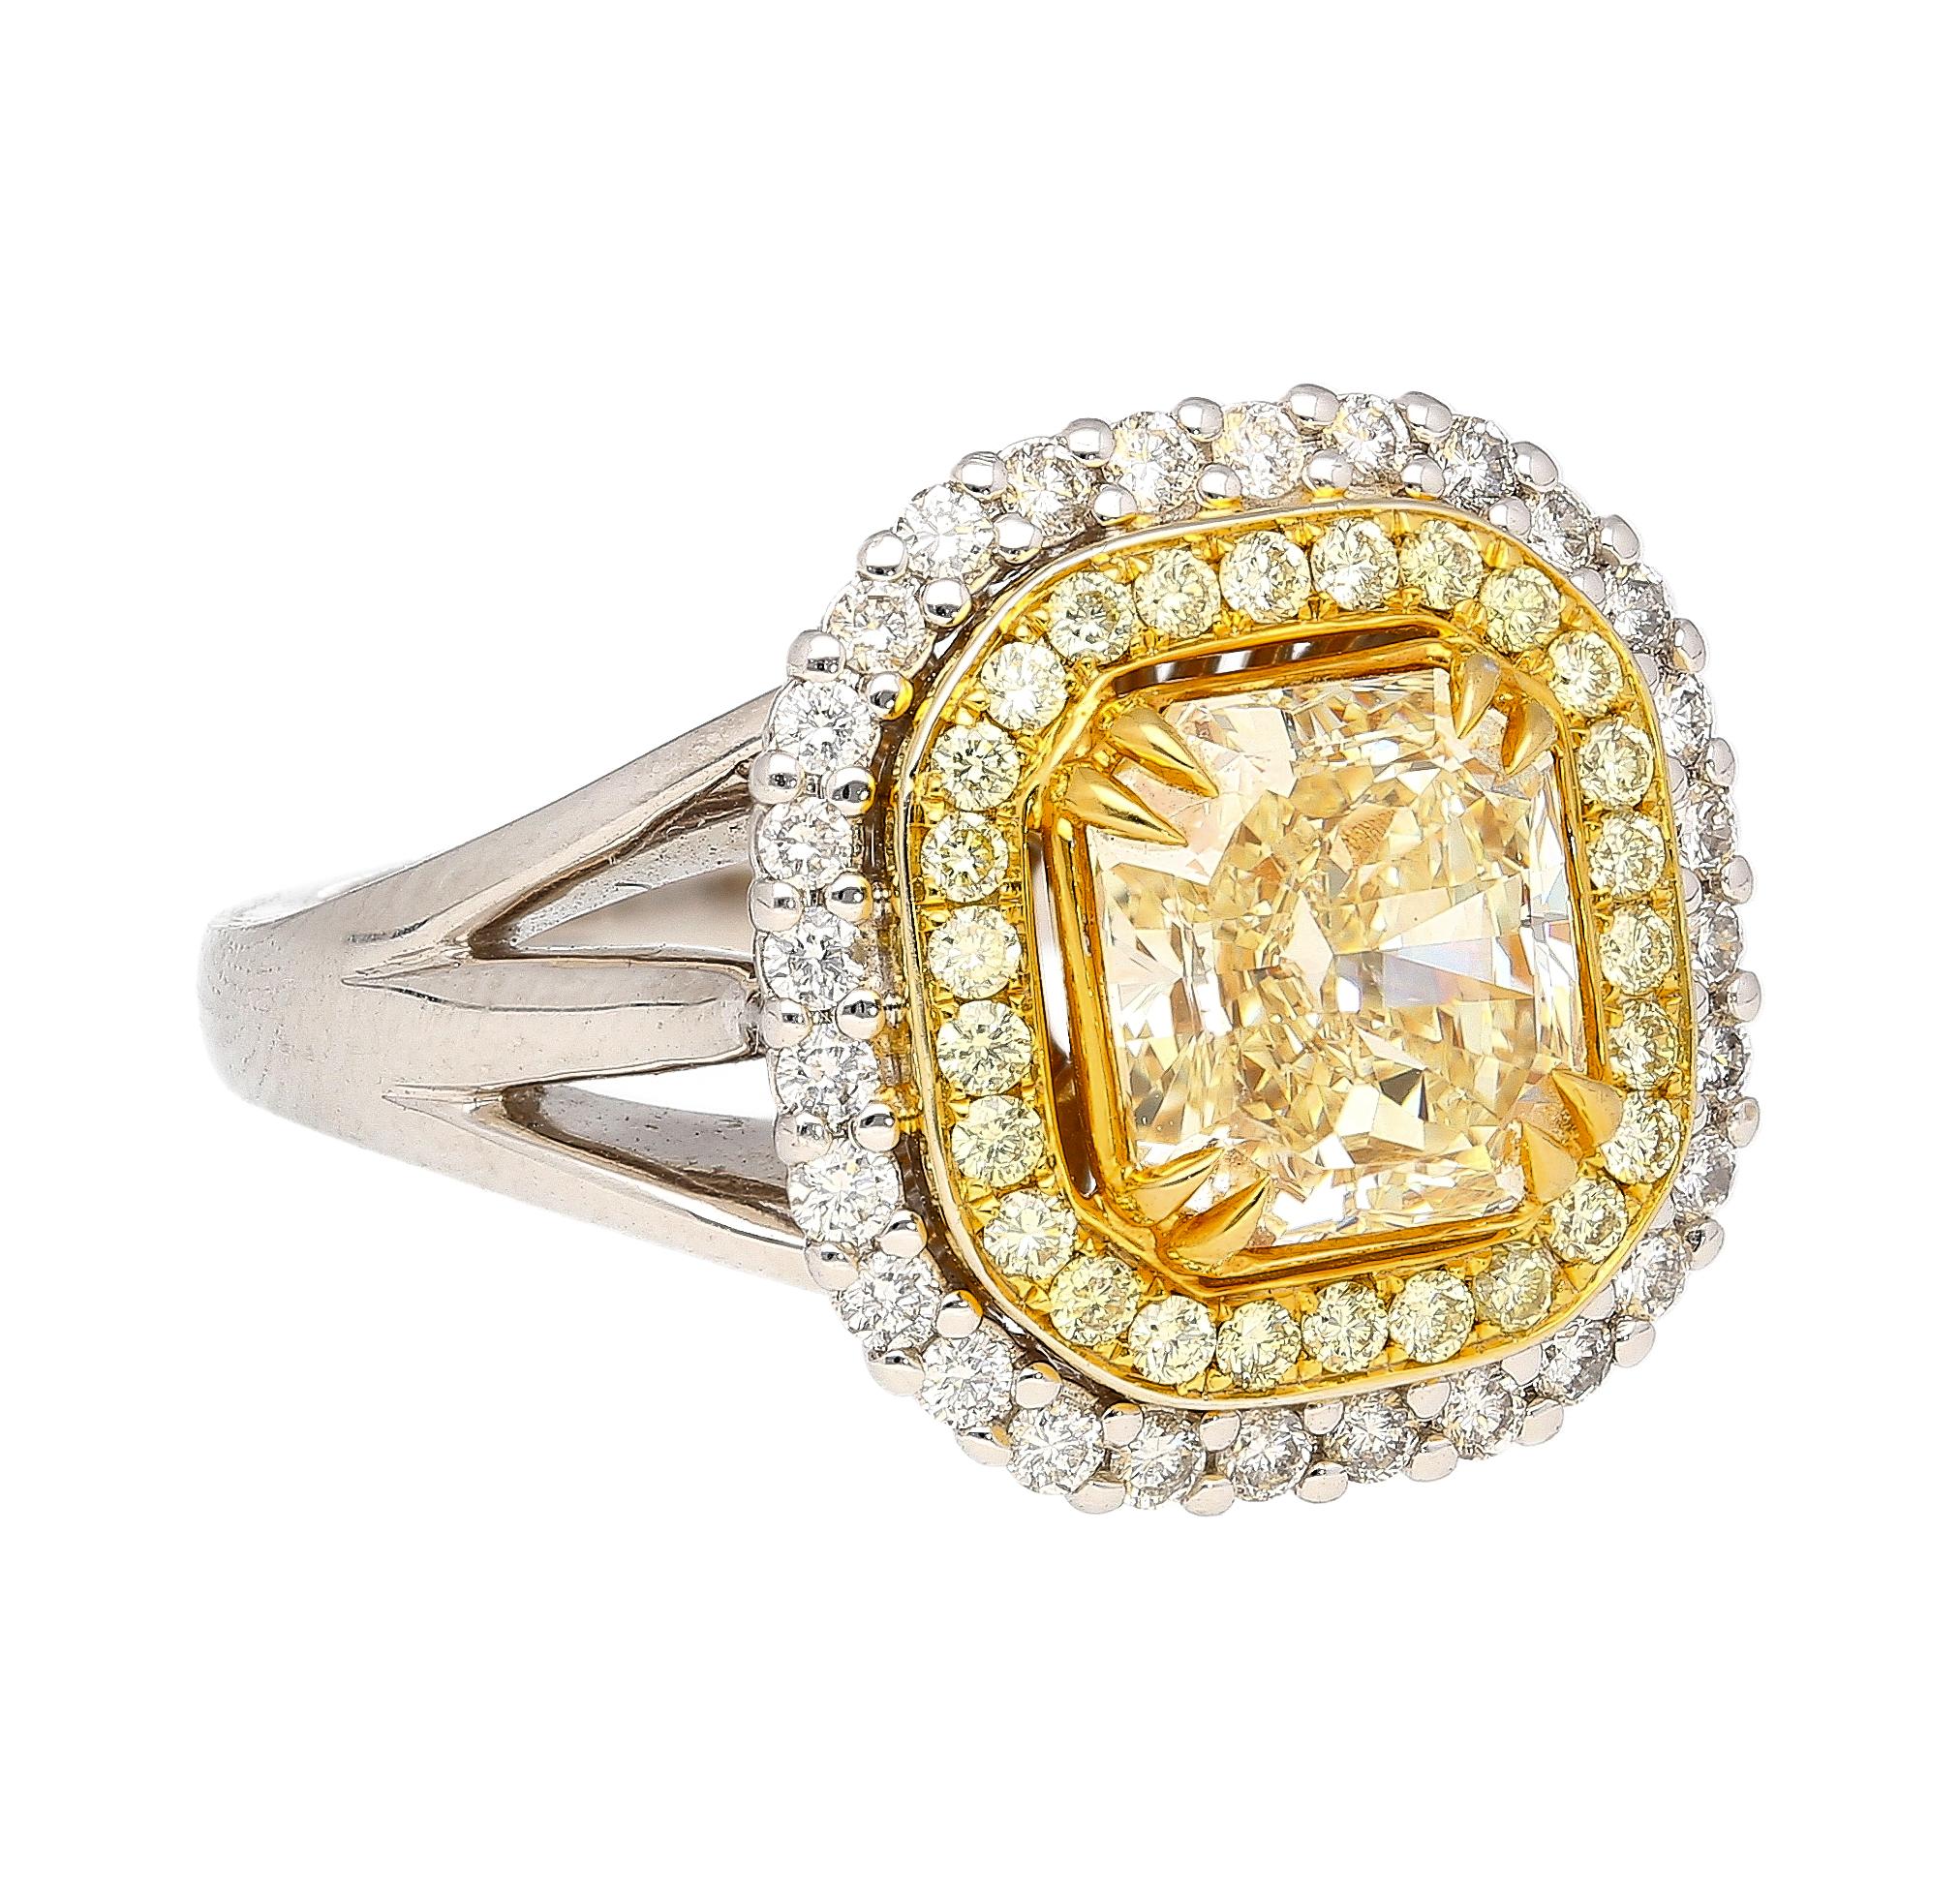 GIA Certified 2.79 Carat Fancy Colored Radiant Cut Diamond 18k Gold Ring For Sale 1